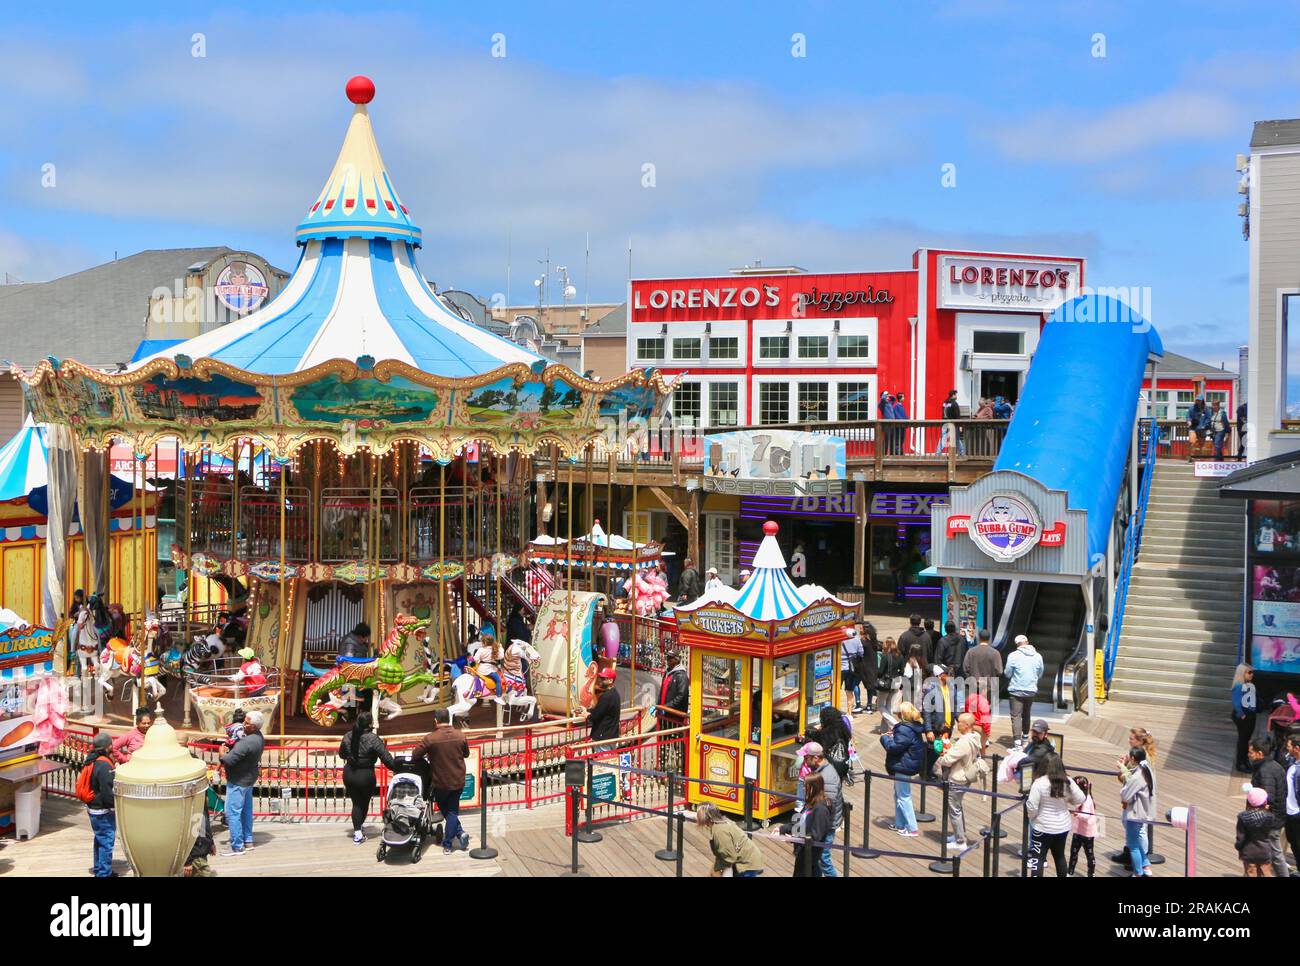 Pier 39 Fisherman's Wharf with fairground rides and entertainment busy with tourists on a sunny afternoon Embarcadero San Francisco California USA Stock Photo